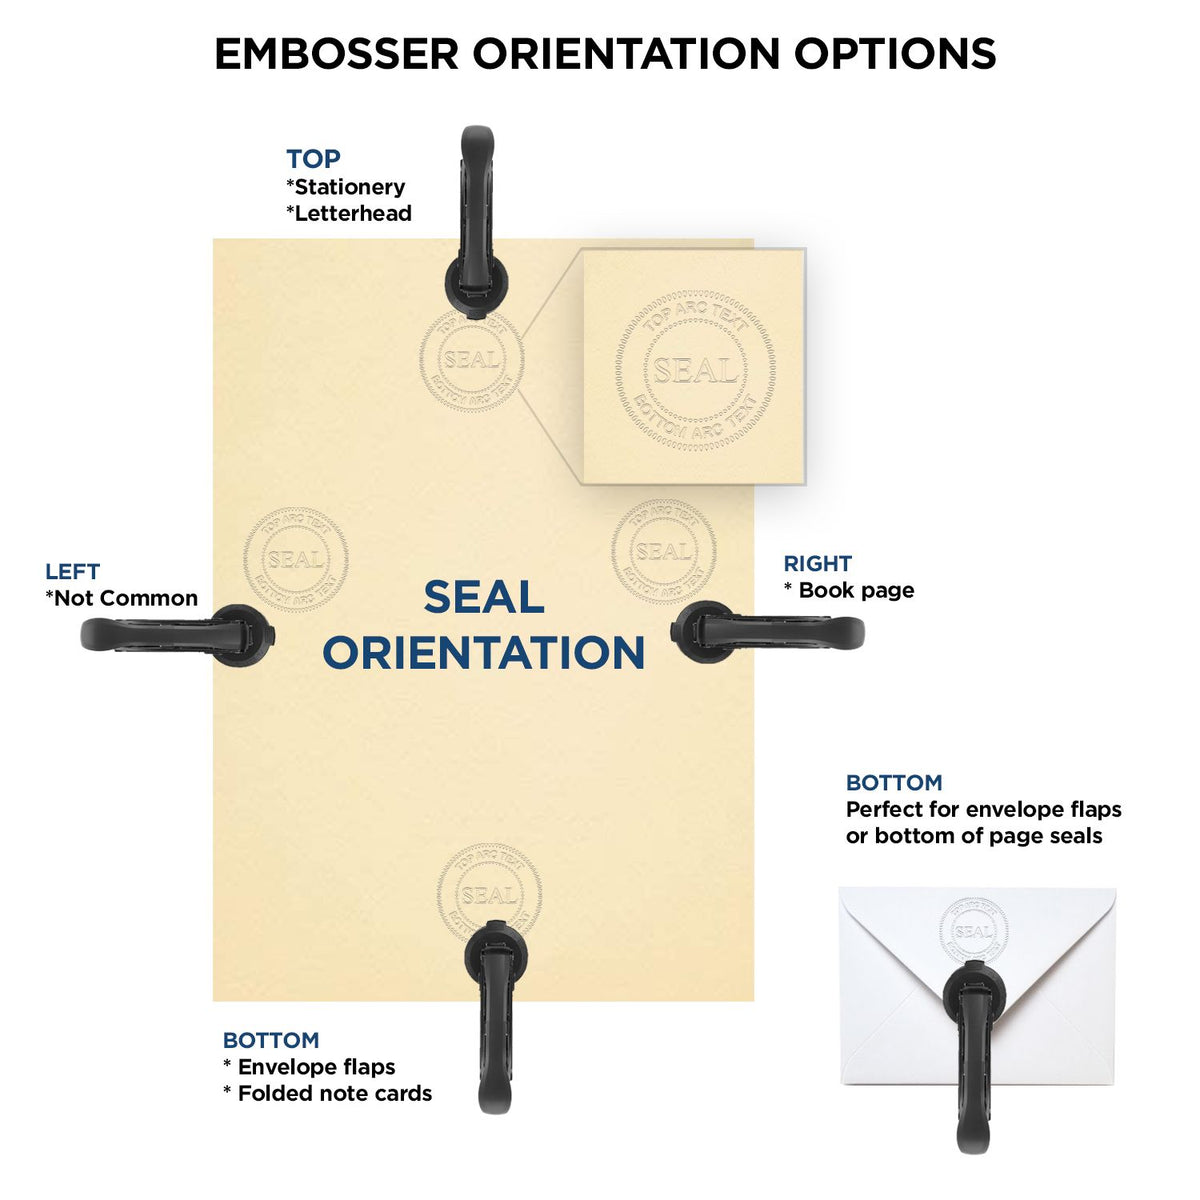 An infographic for the Heavy Duty Cast Iron North Dakota Geologist Seal Embosser showing embosser orientation, this is showing examples of a top, bottom, right and left insert.